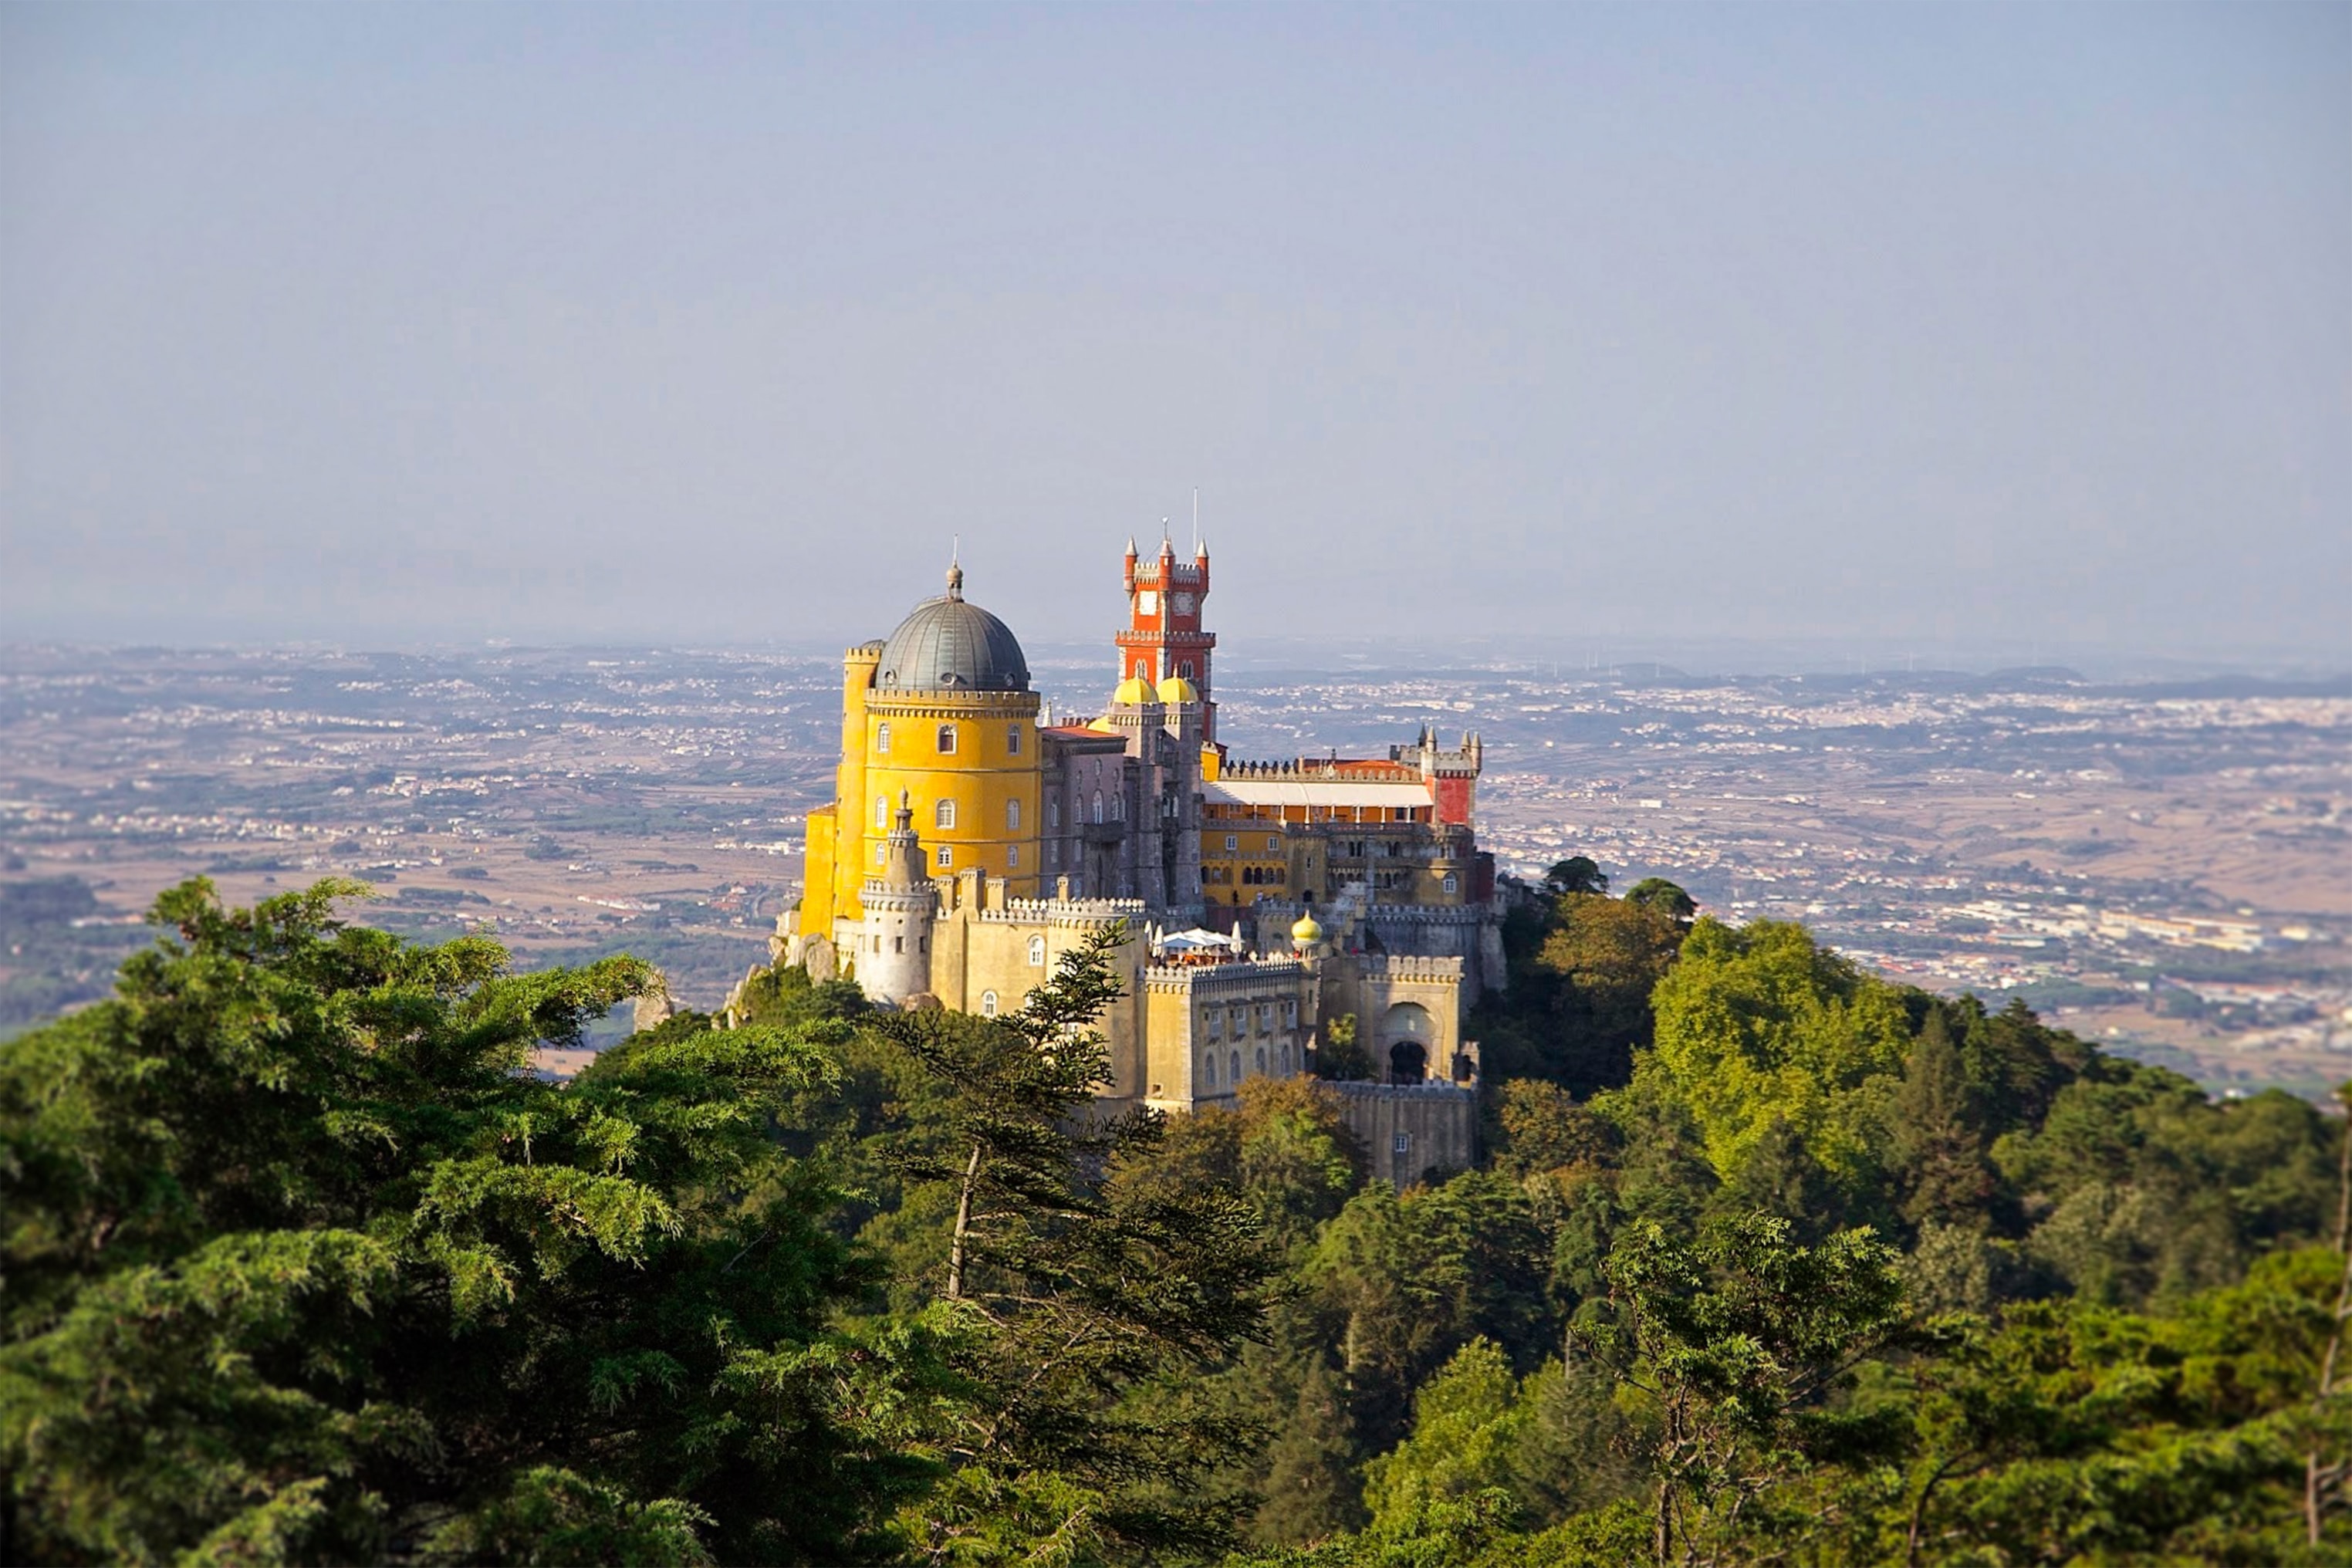 Exterior view of Sintra Palace (Palácio Nacional de Sintra) in Portugal, characterized by its distinctive blend of architectural styles, including Gothic, Moorish, and Manueline influences, set against a backdrop of lush greenery.